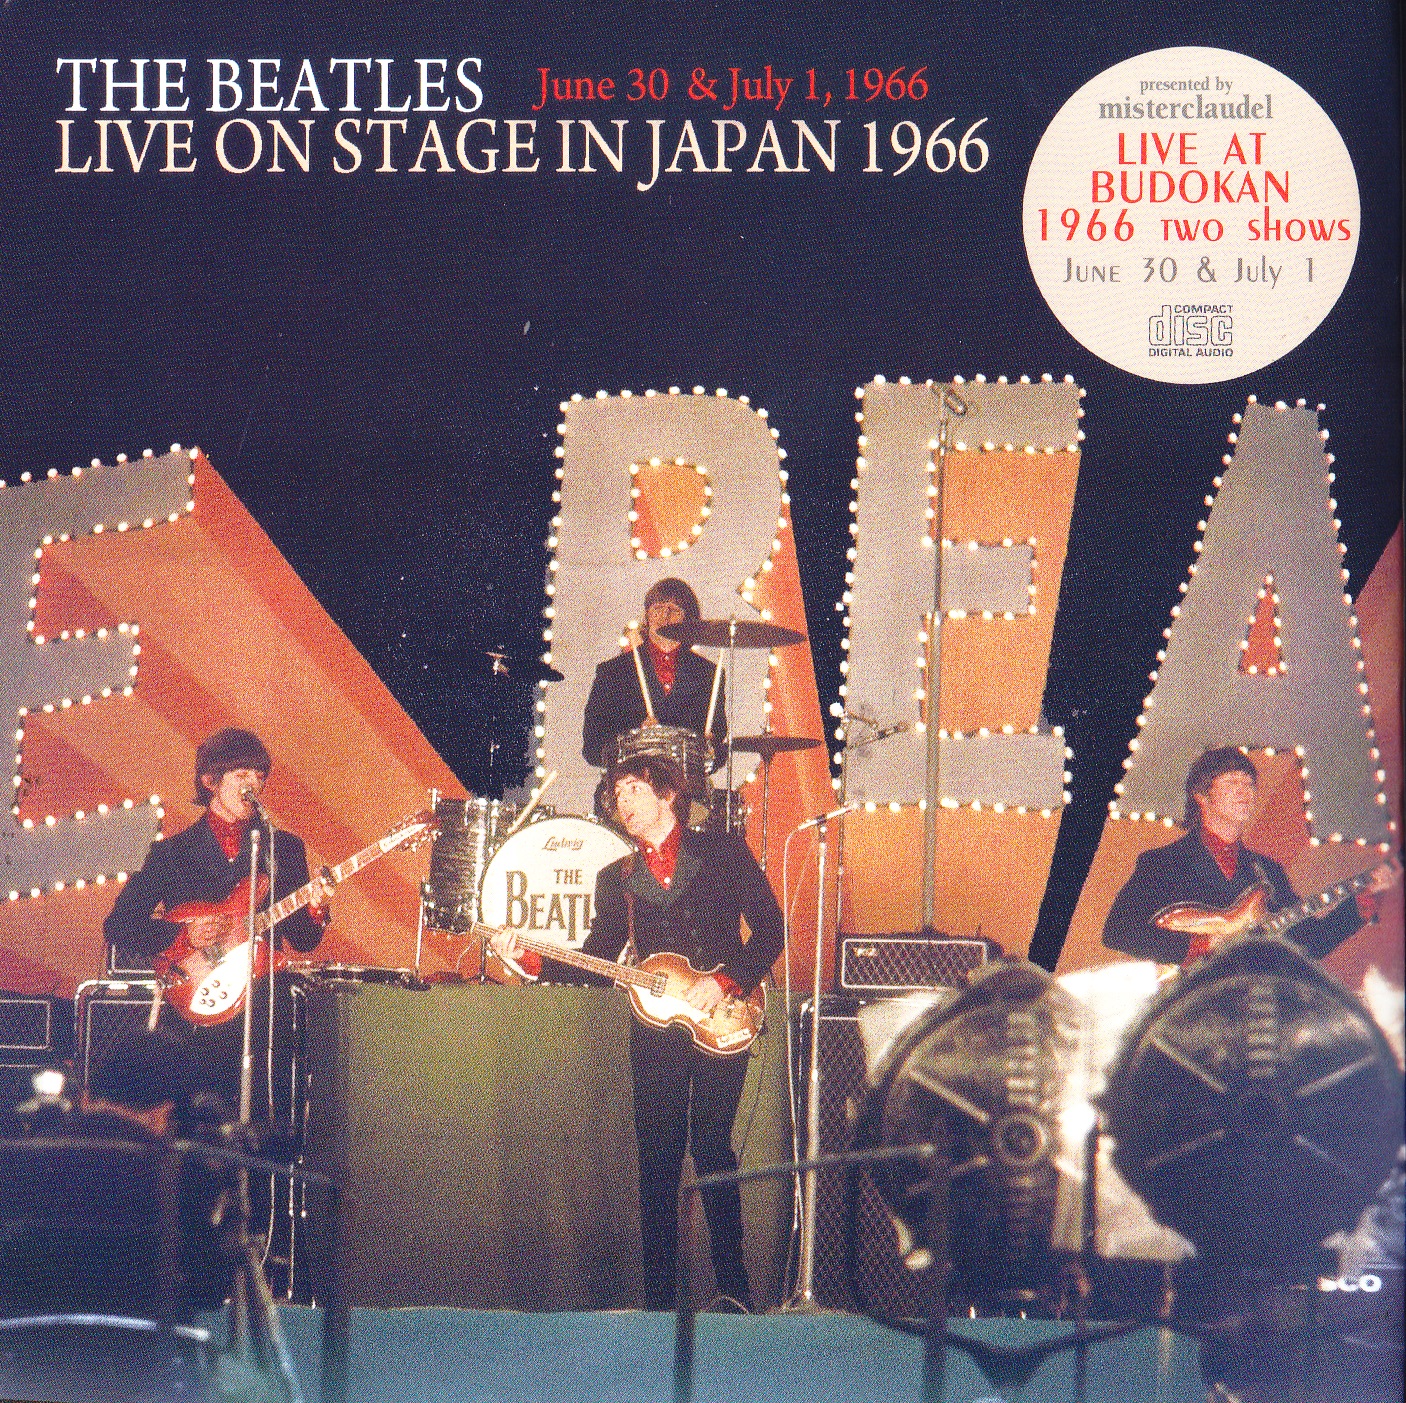 mccd-241-242 - The Beatles - Live On Stage In Japan 1966 Jun 30 & July 1 1966 (2018) (2 CD Set) Front.jpg